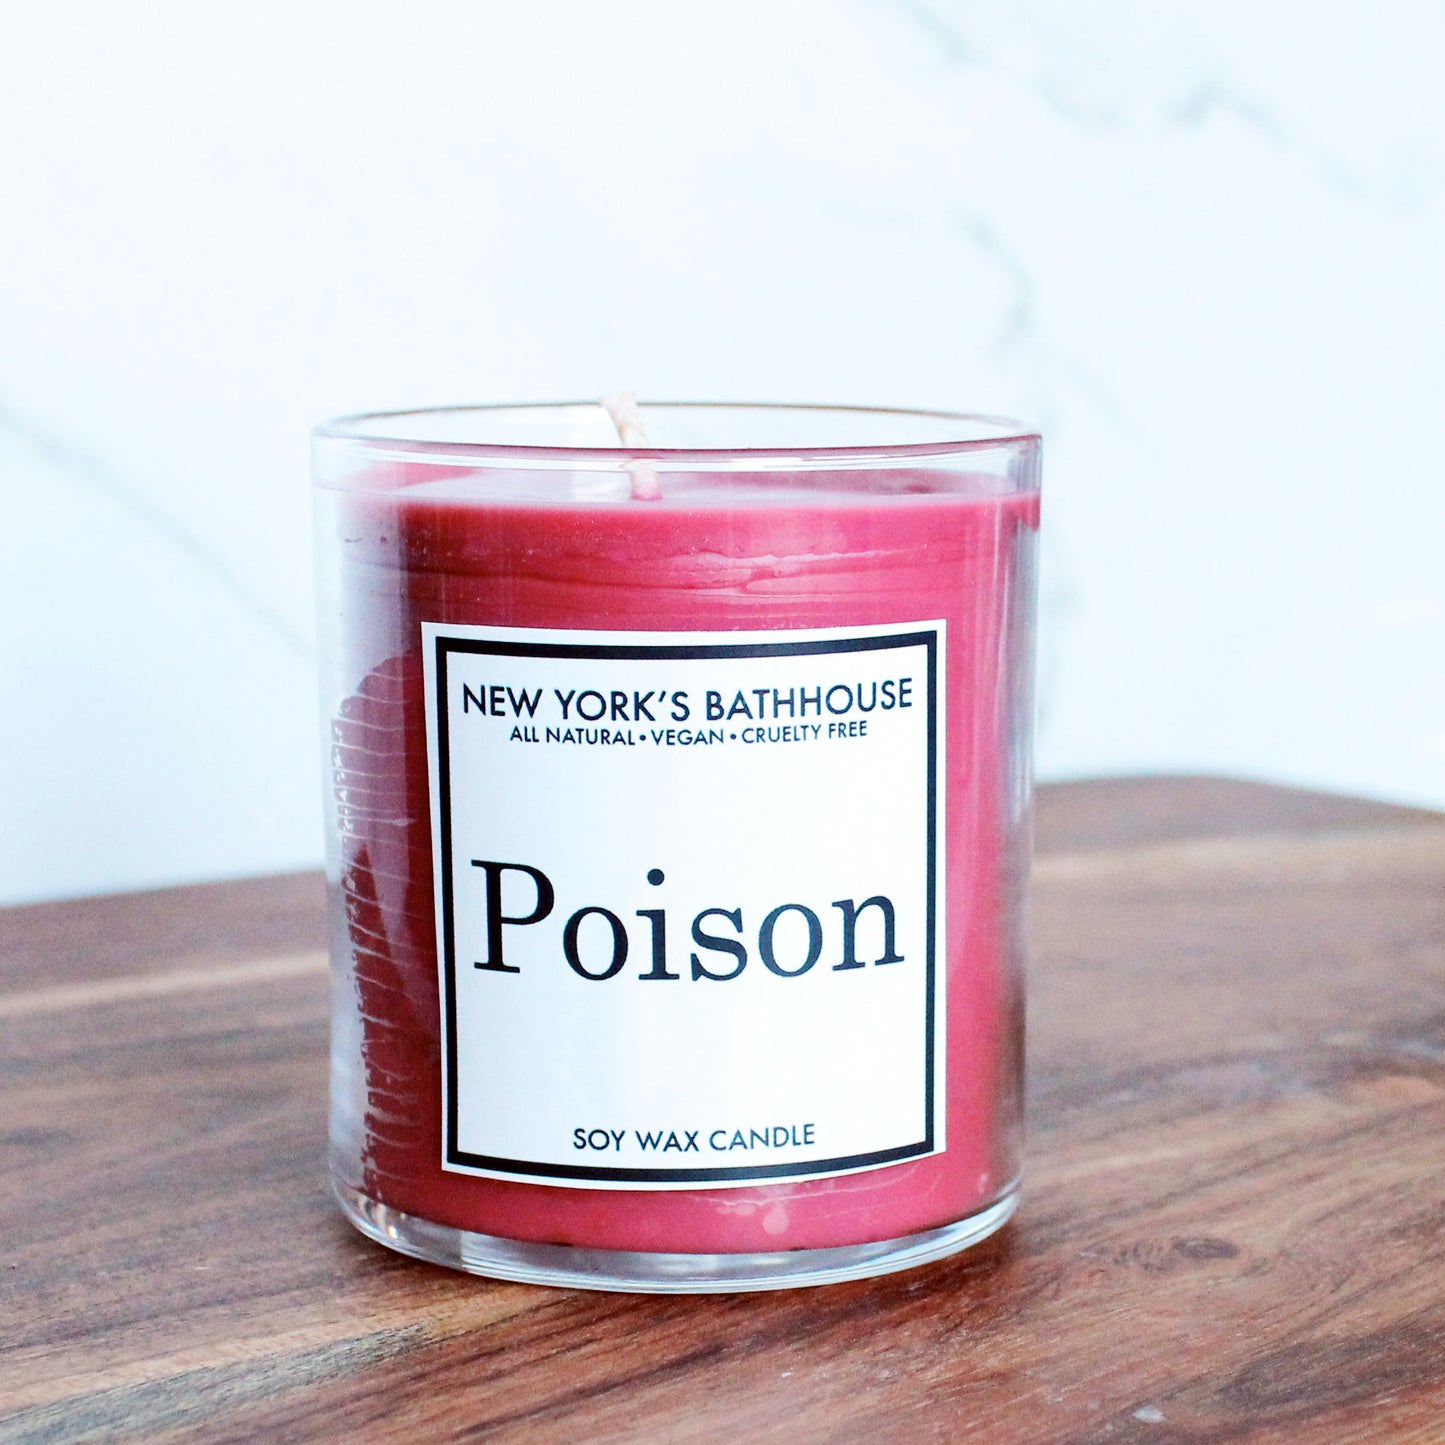 Poison Dupe Soy Wax Candle - New York's Bathhouse